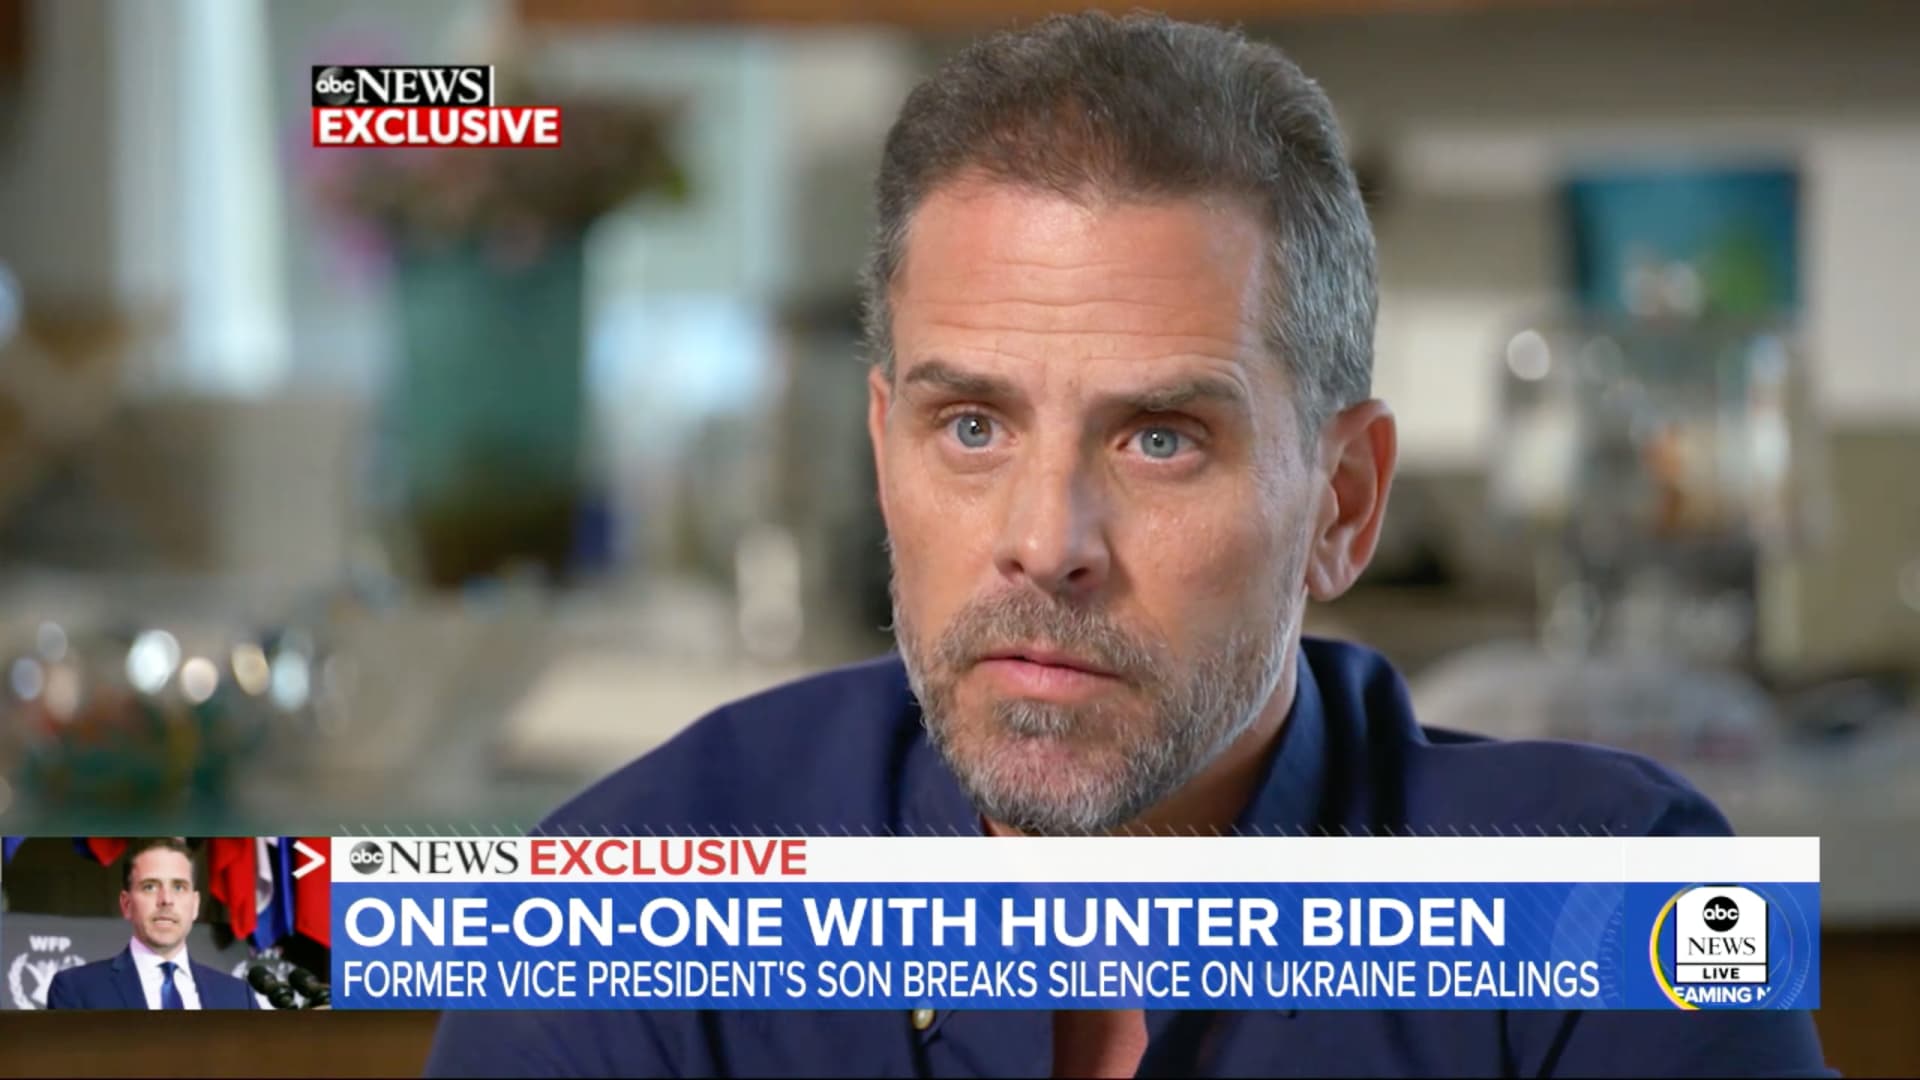 Federal agents think they have enough evidence to charge Hunter Biden with tax and gun-buy crimes, report says